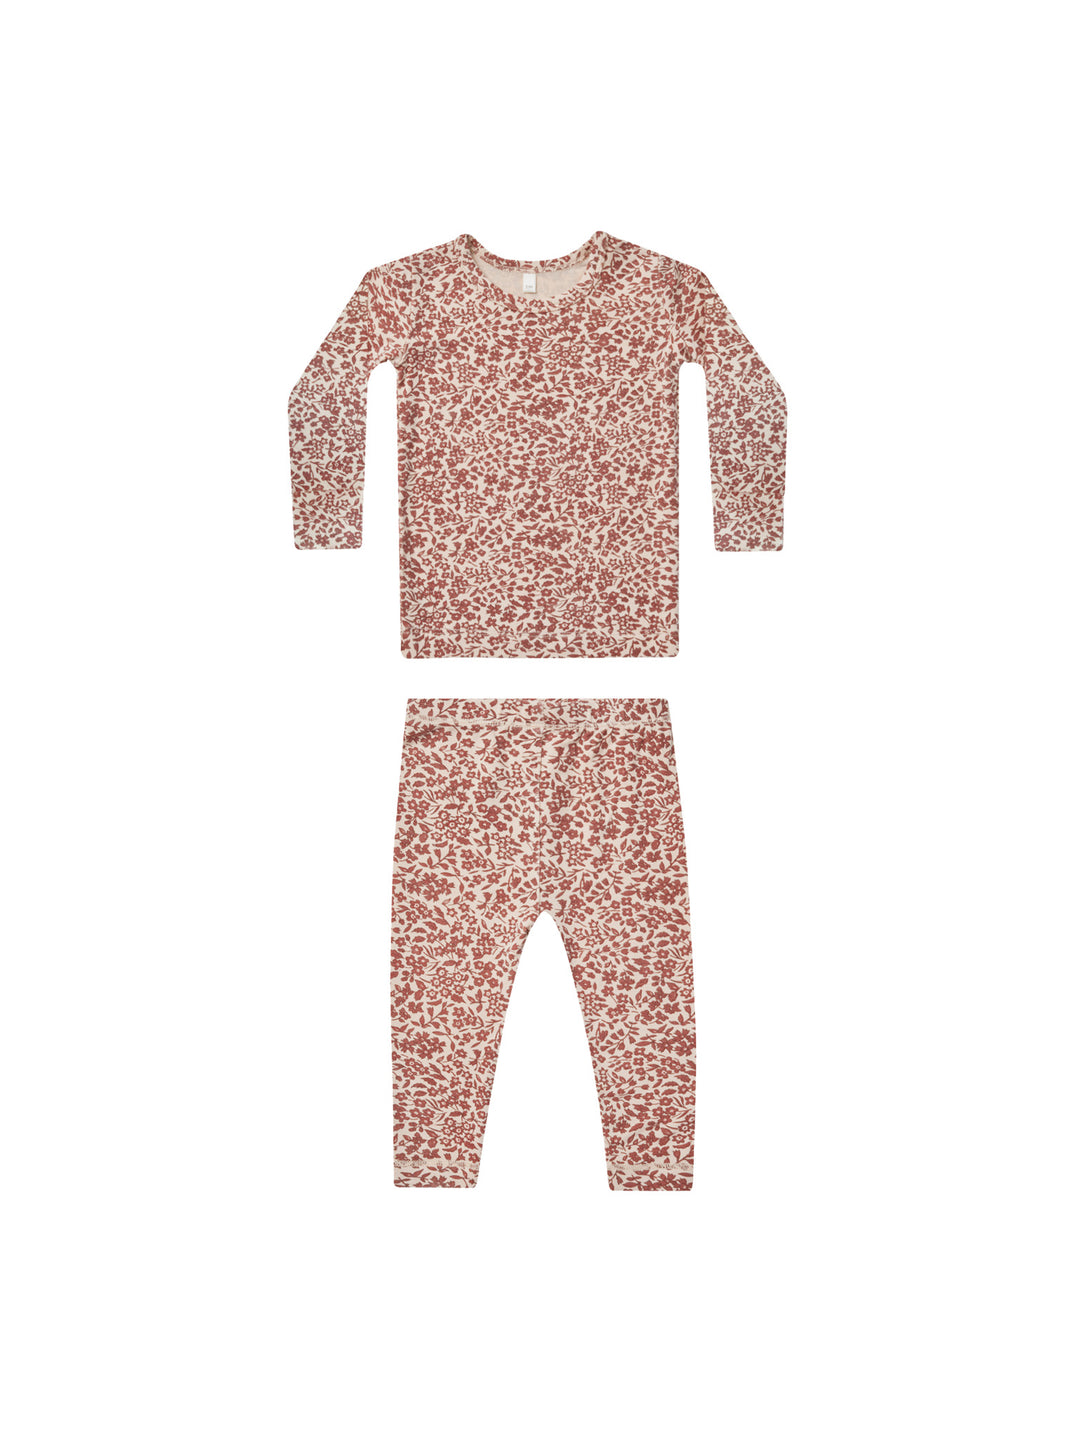 Quincy Mae - Bamboo Pajama Set in Flower Field